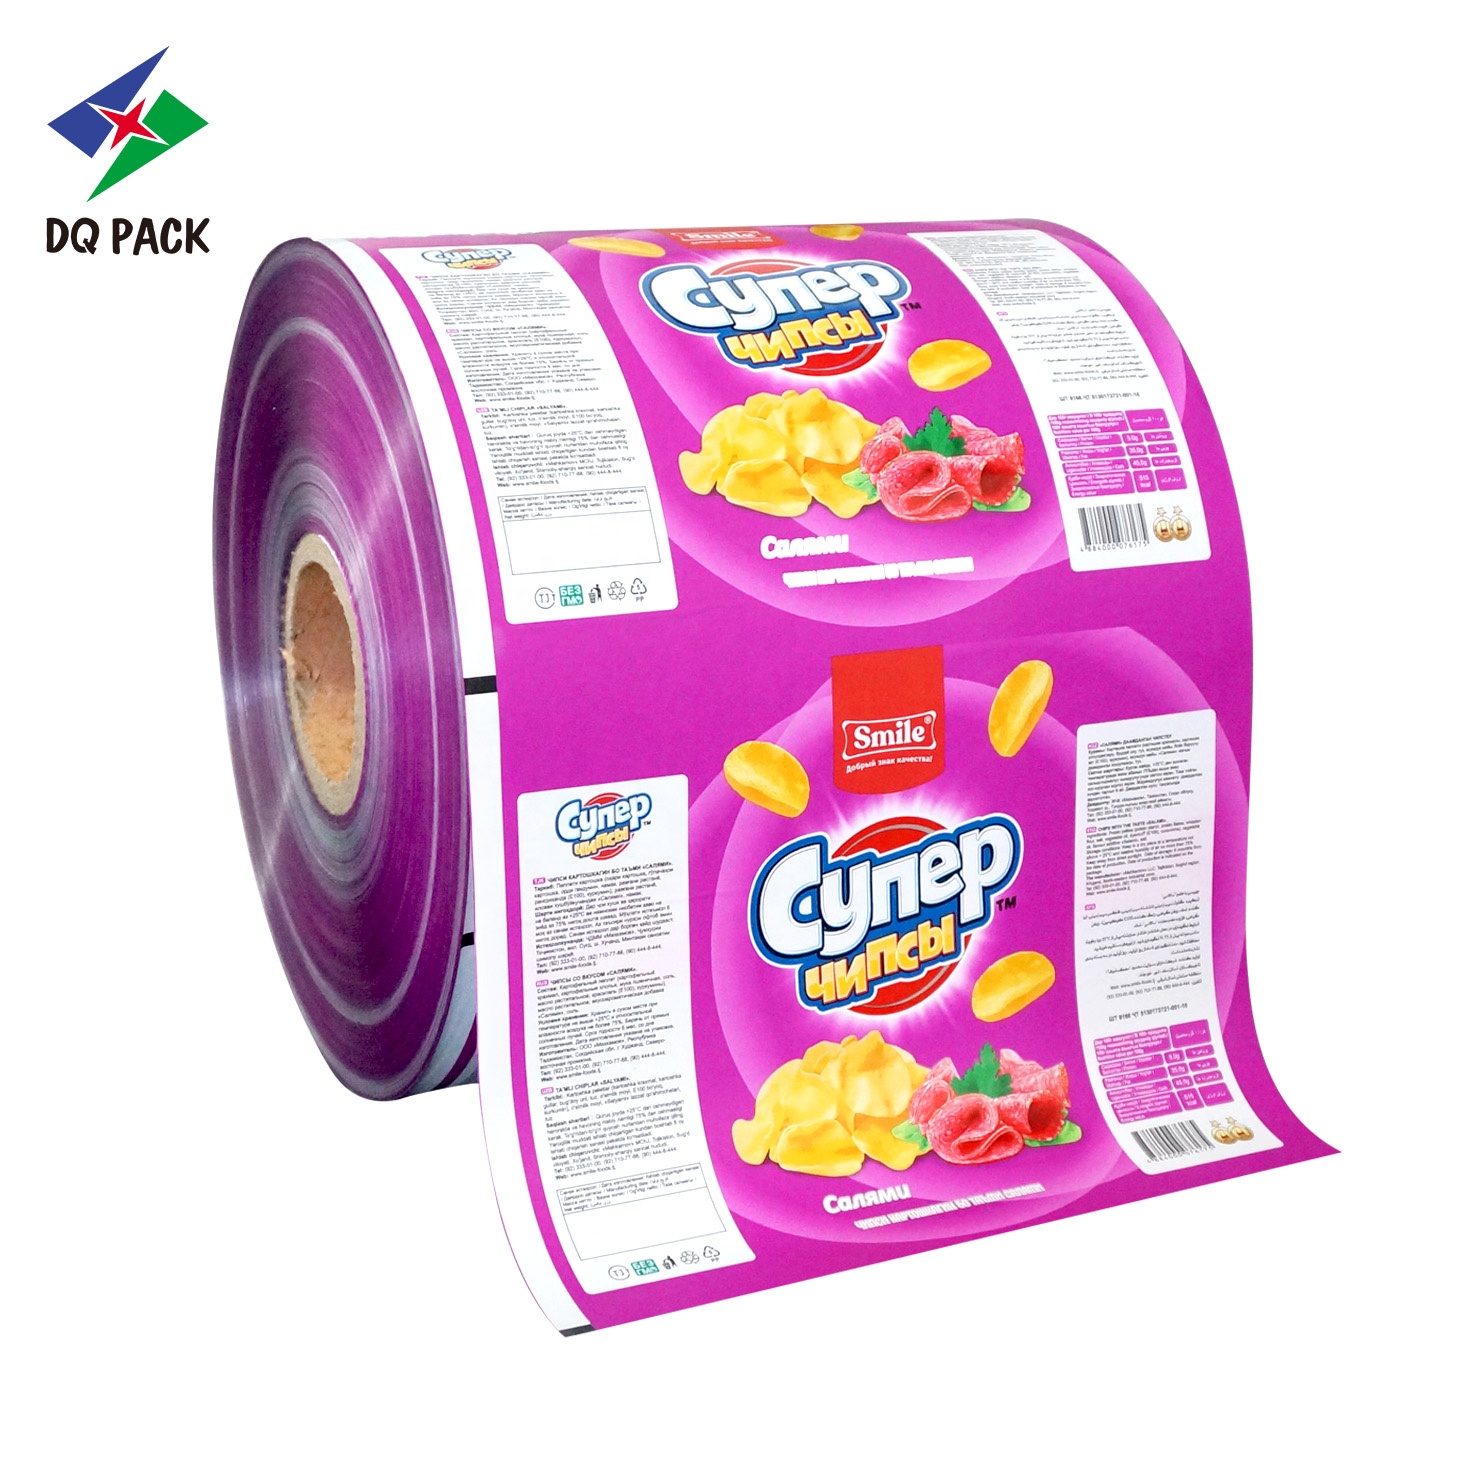 DQ PACK Custom Printing Snack Chips Metalized Packaging Roll Film